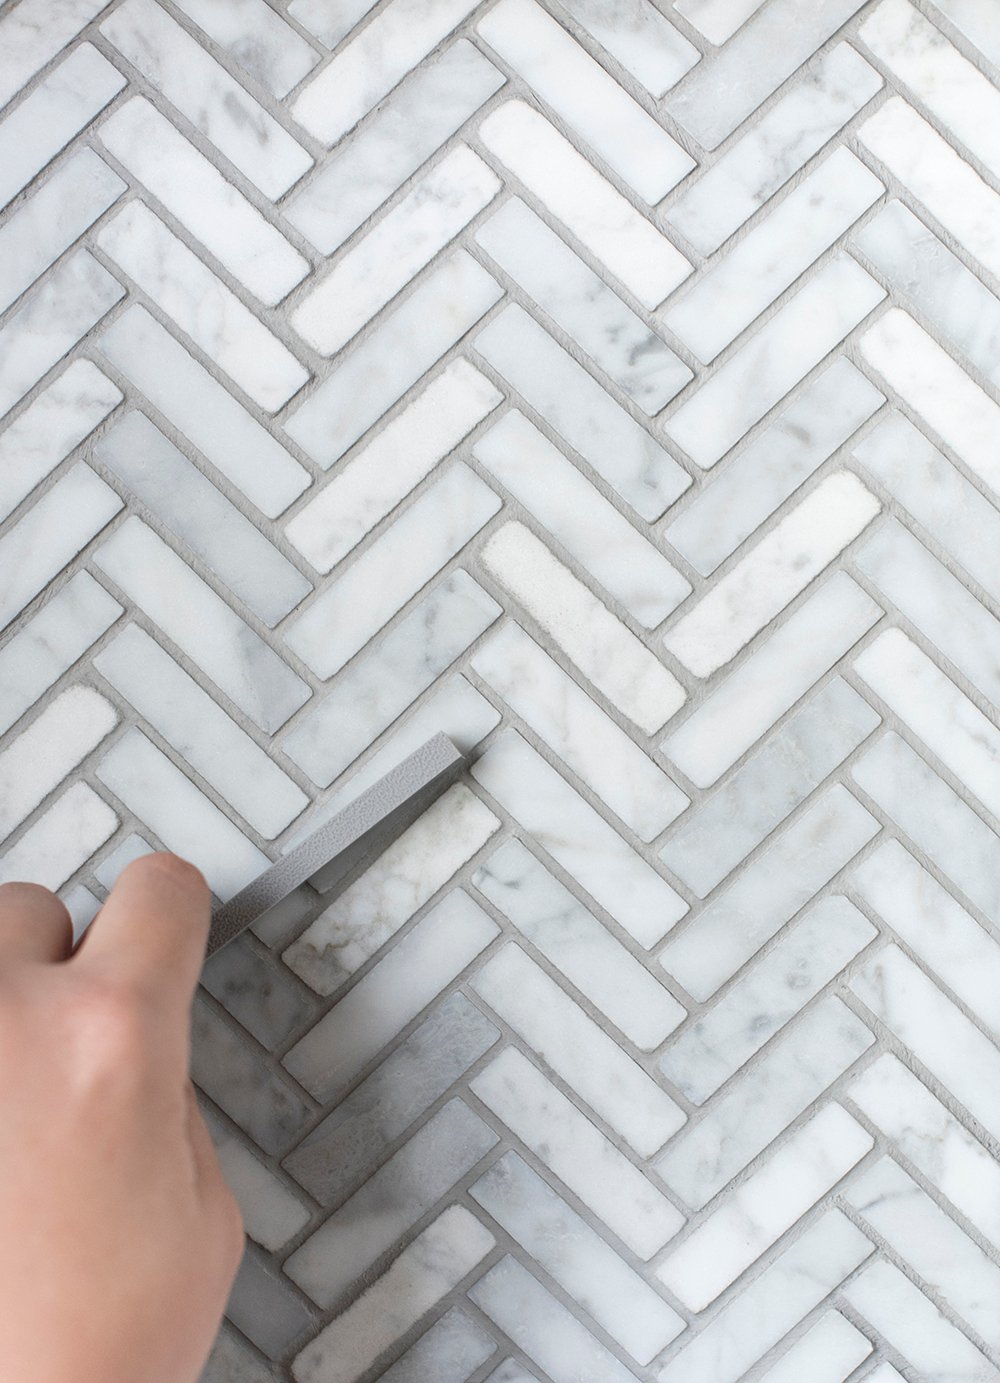 How We Choose : Grout for Tile - Room for Tuesday